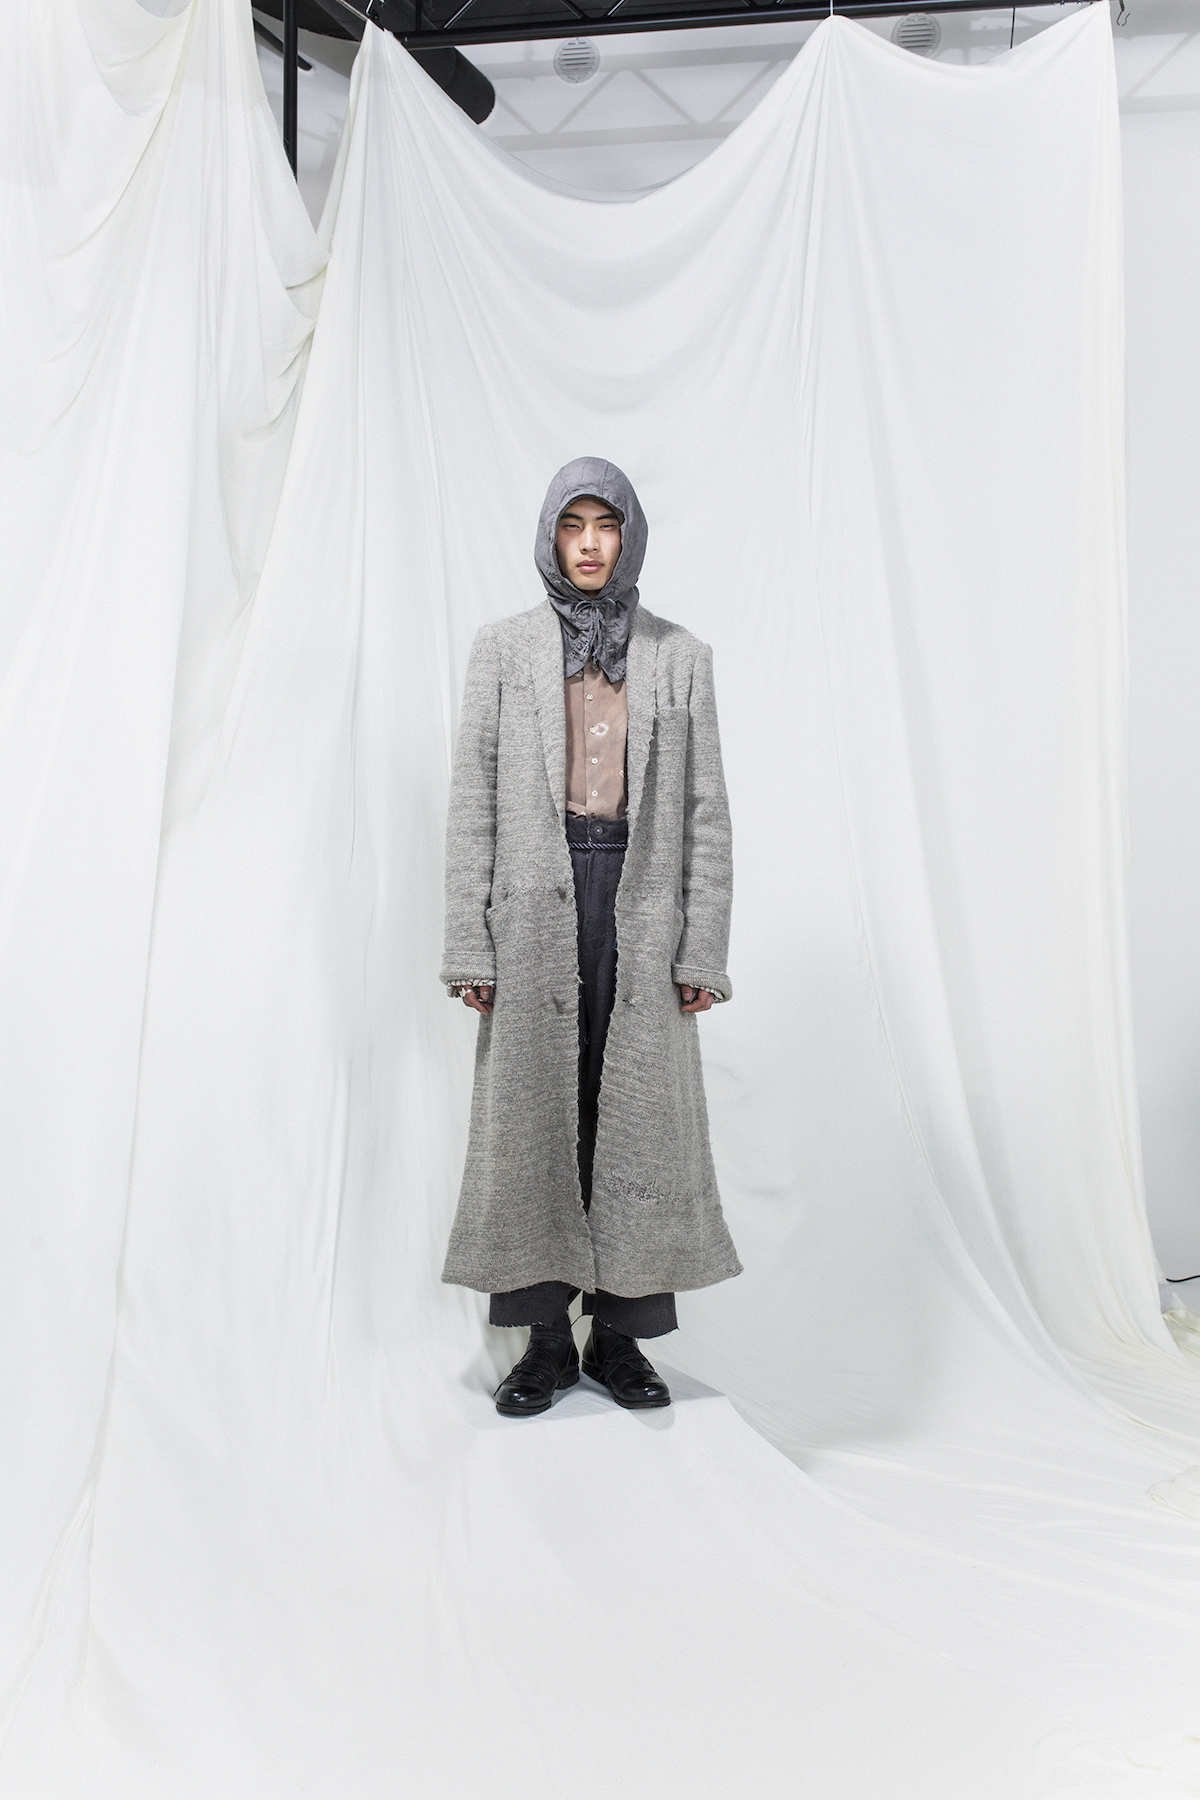 Model is wearing a light grey coat, dark grey hoodie. Underneath pink buttoned shirt and grey oversized trousers